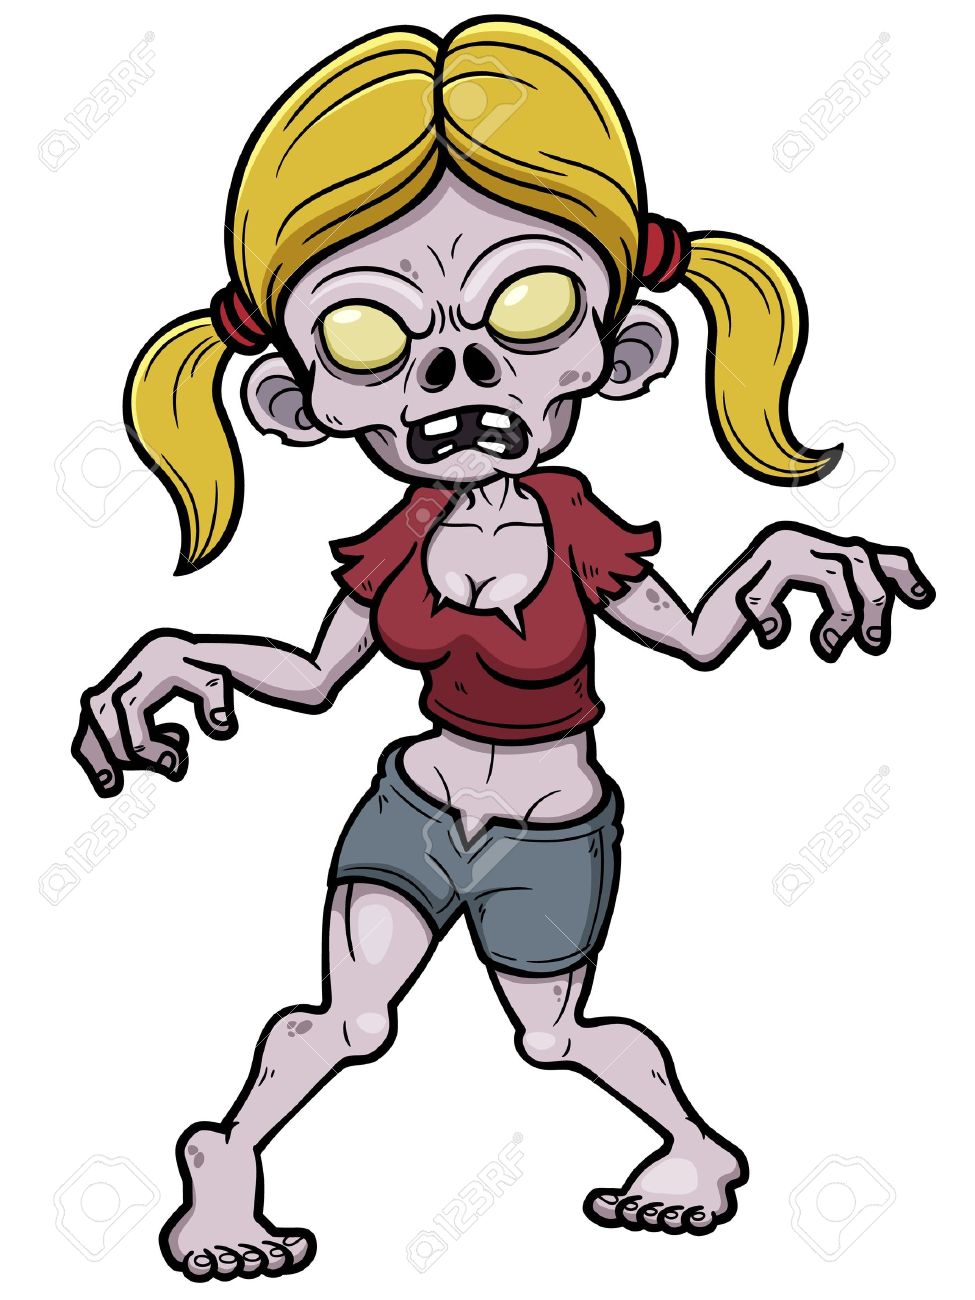 Zombie clipart zombie lady. Zombies free download best